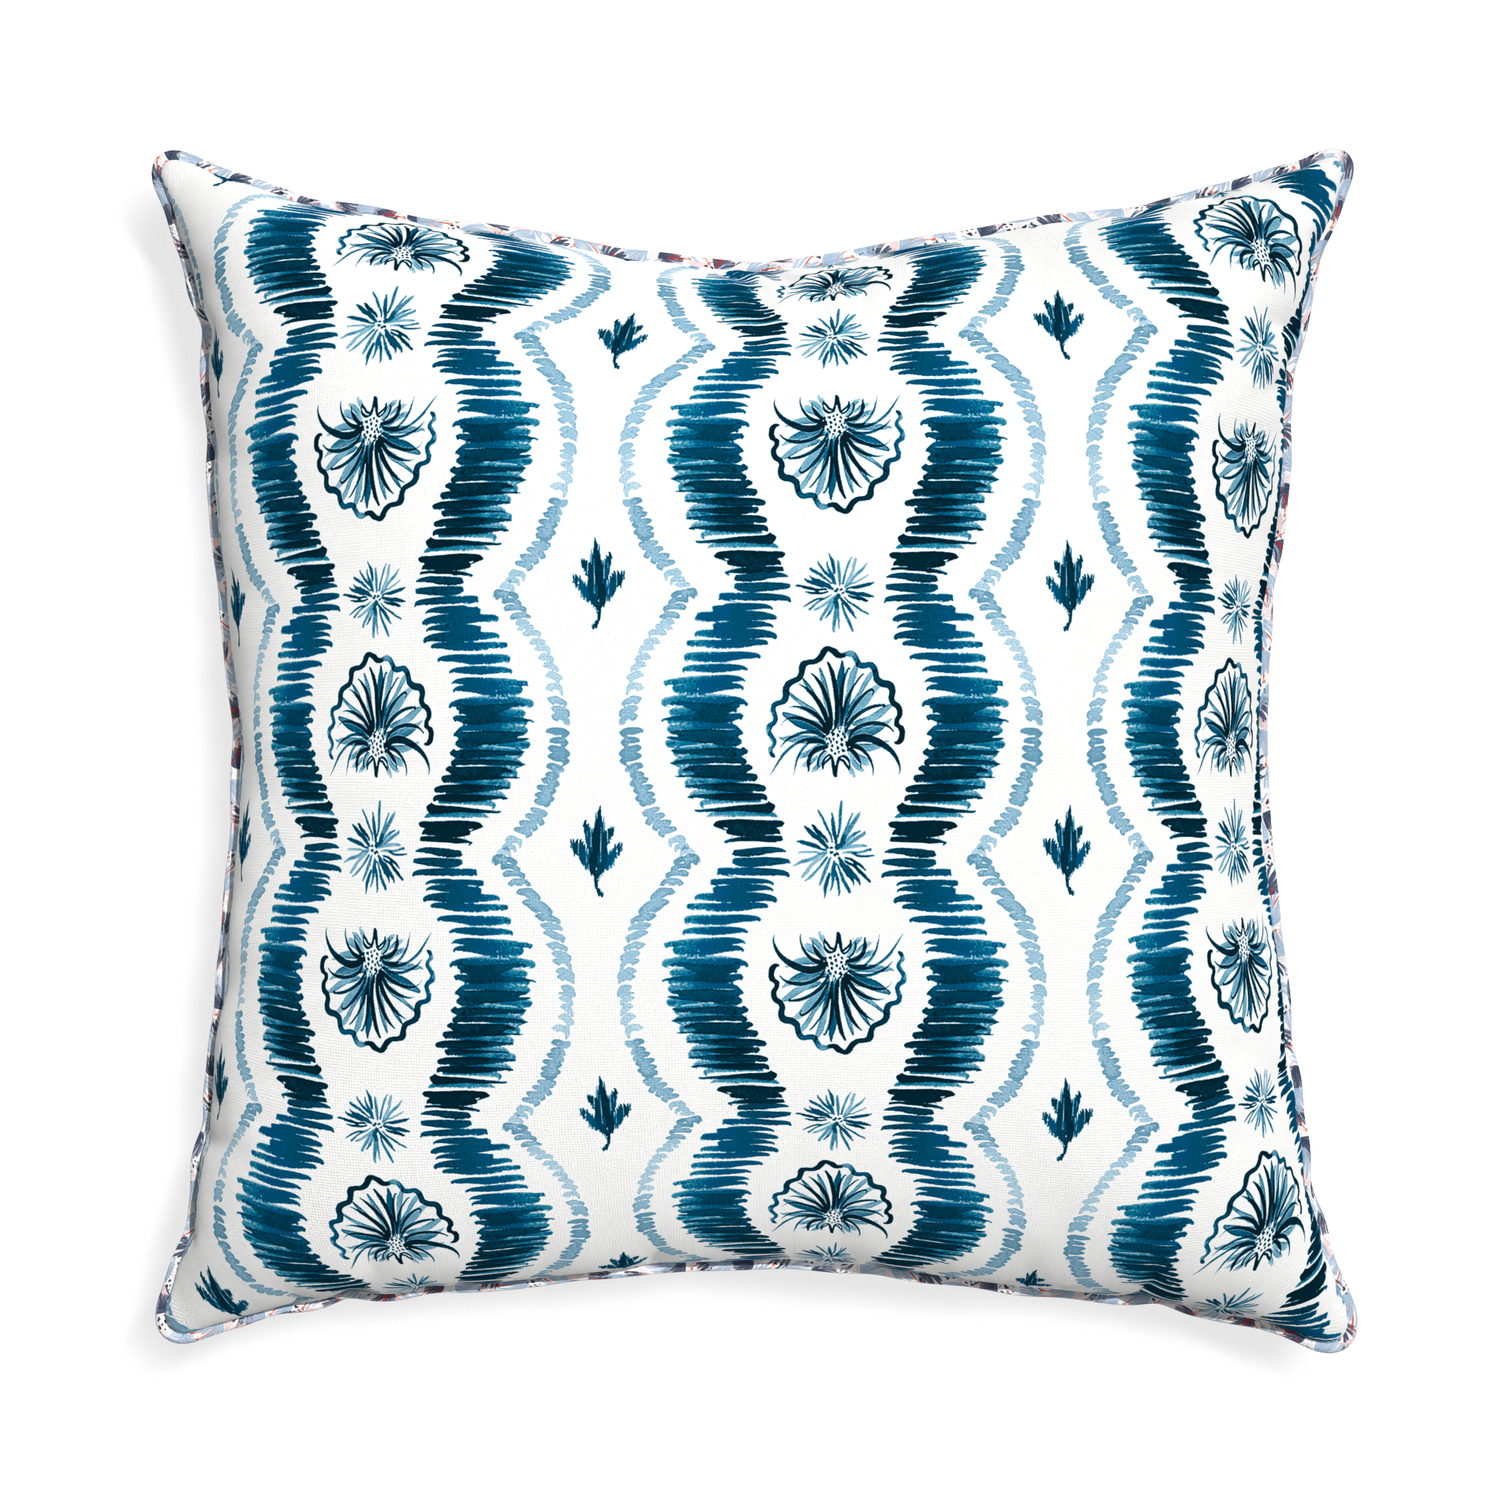 Euro-sham alice custom blue ikatpillow with e piping on white background